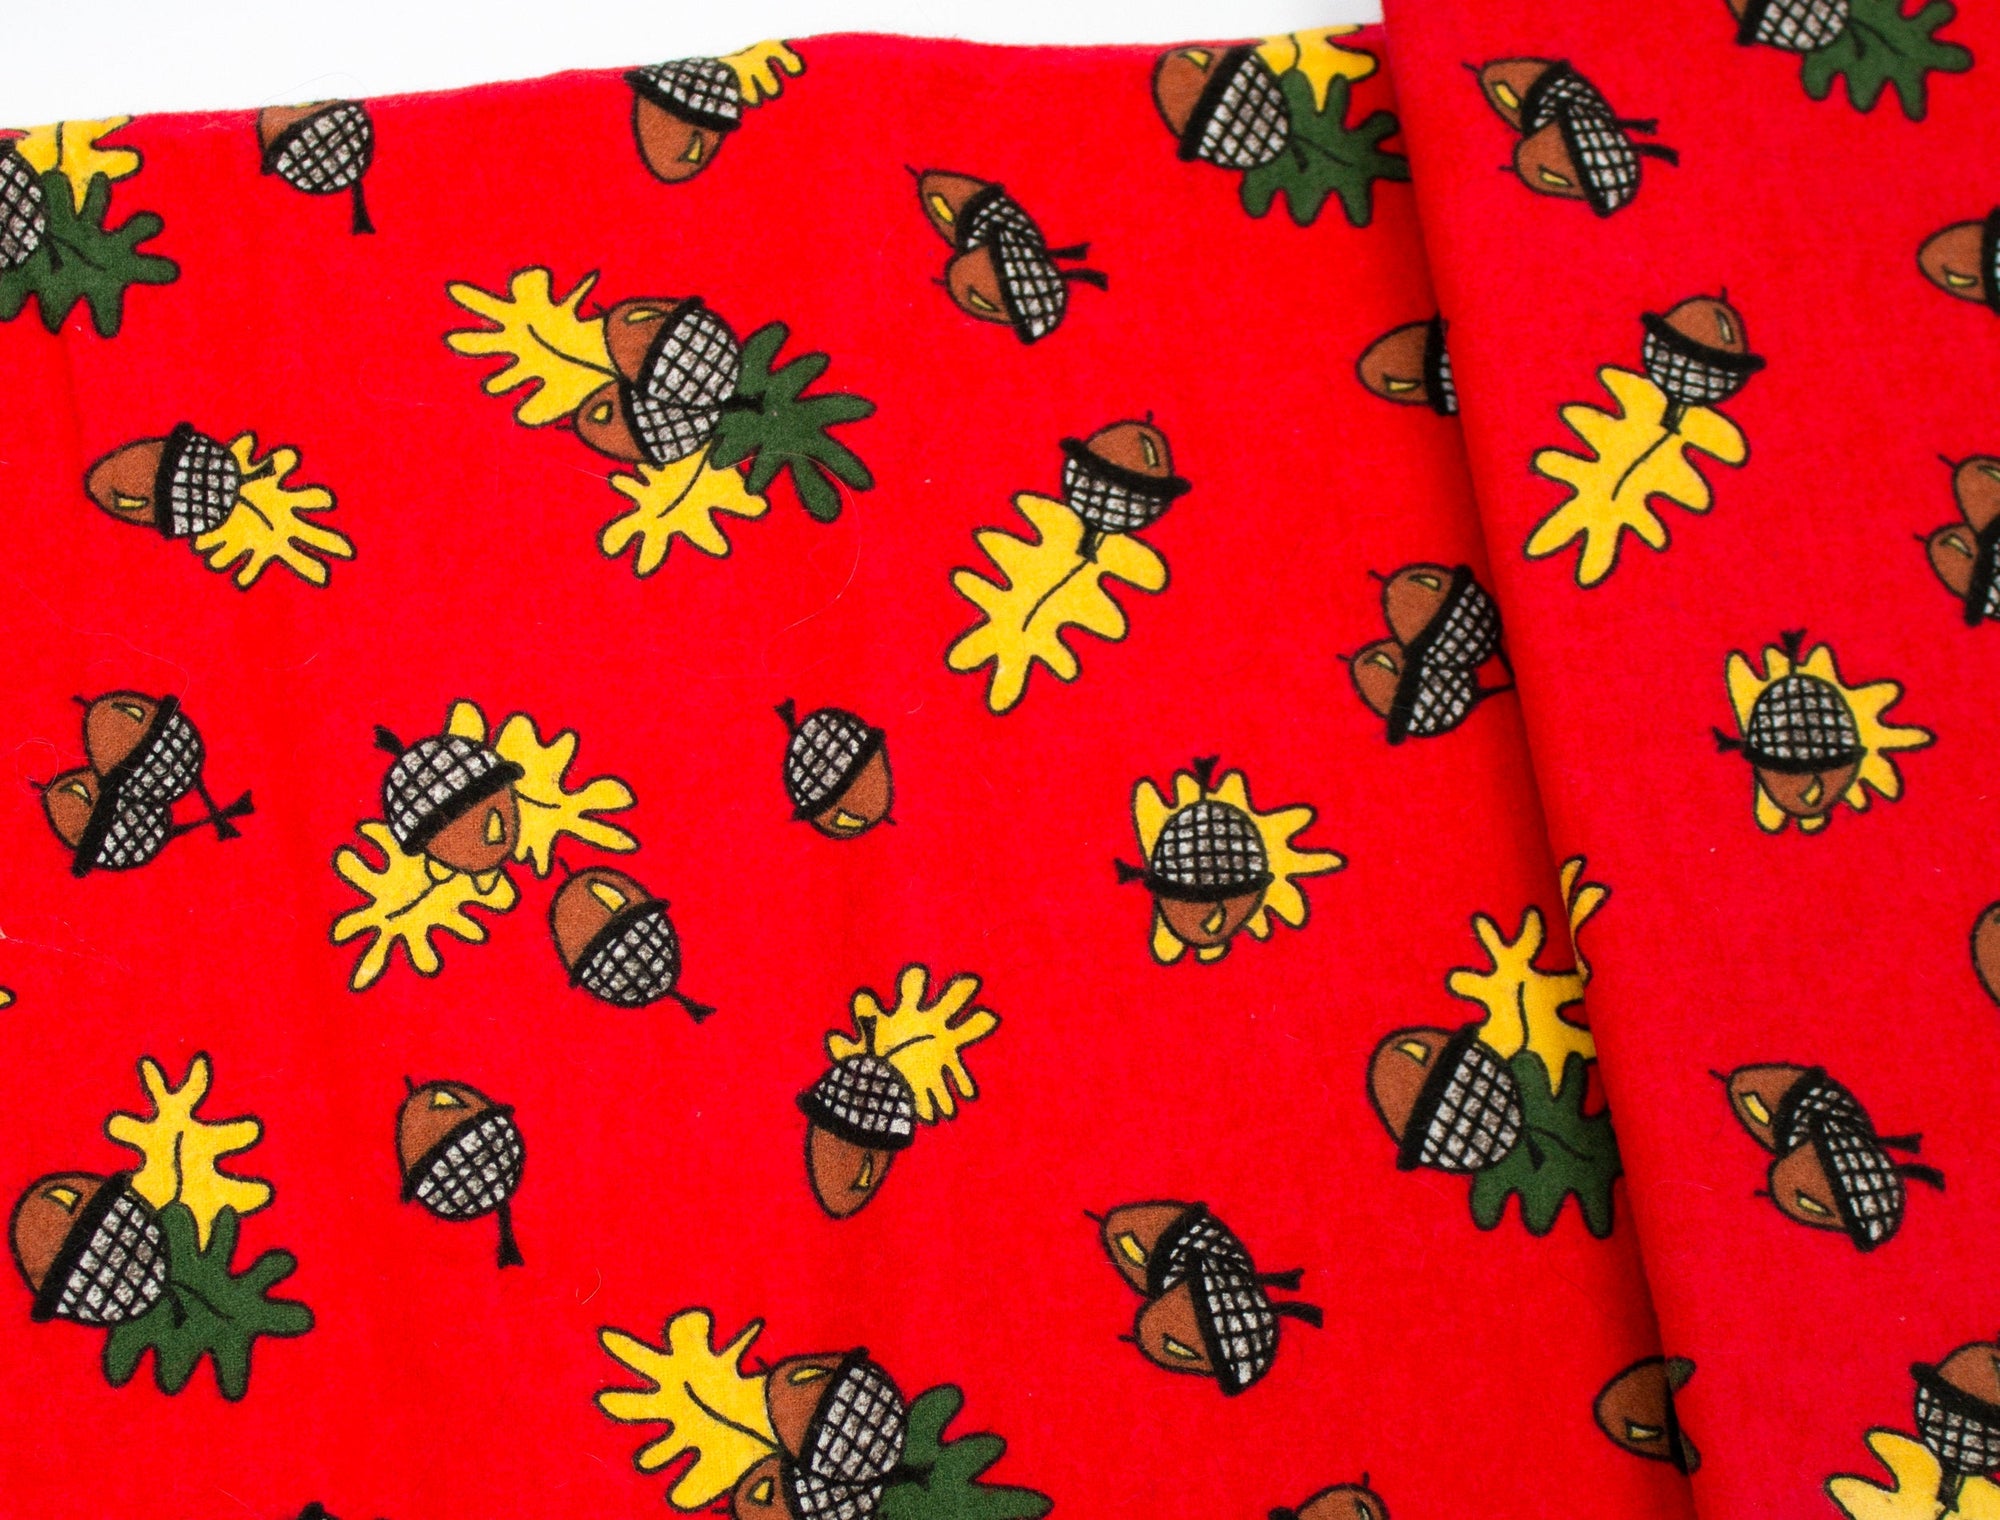 Vintage Fabric Red Flannel Acorns and Leaves - Measures 45" x 36"